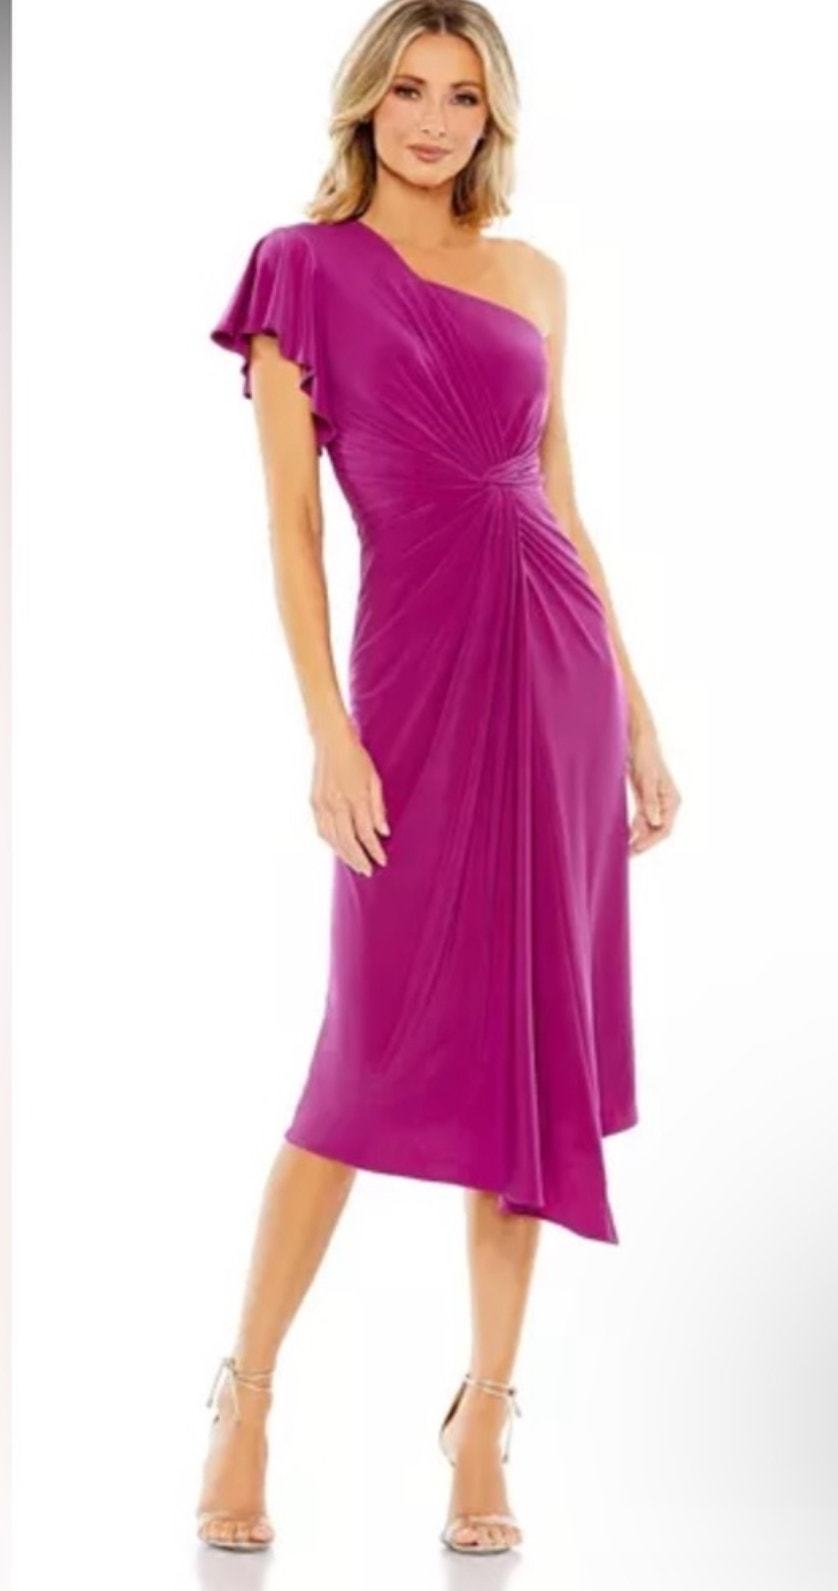 Primary image for Mac Duggal Women's Magenta One Shoulder Midi Jersey Dress Lined Cap Sleeve 2